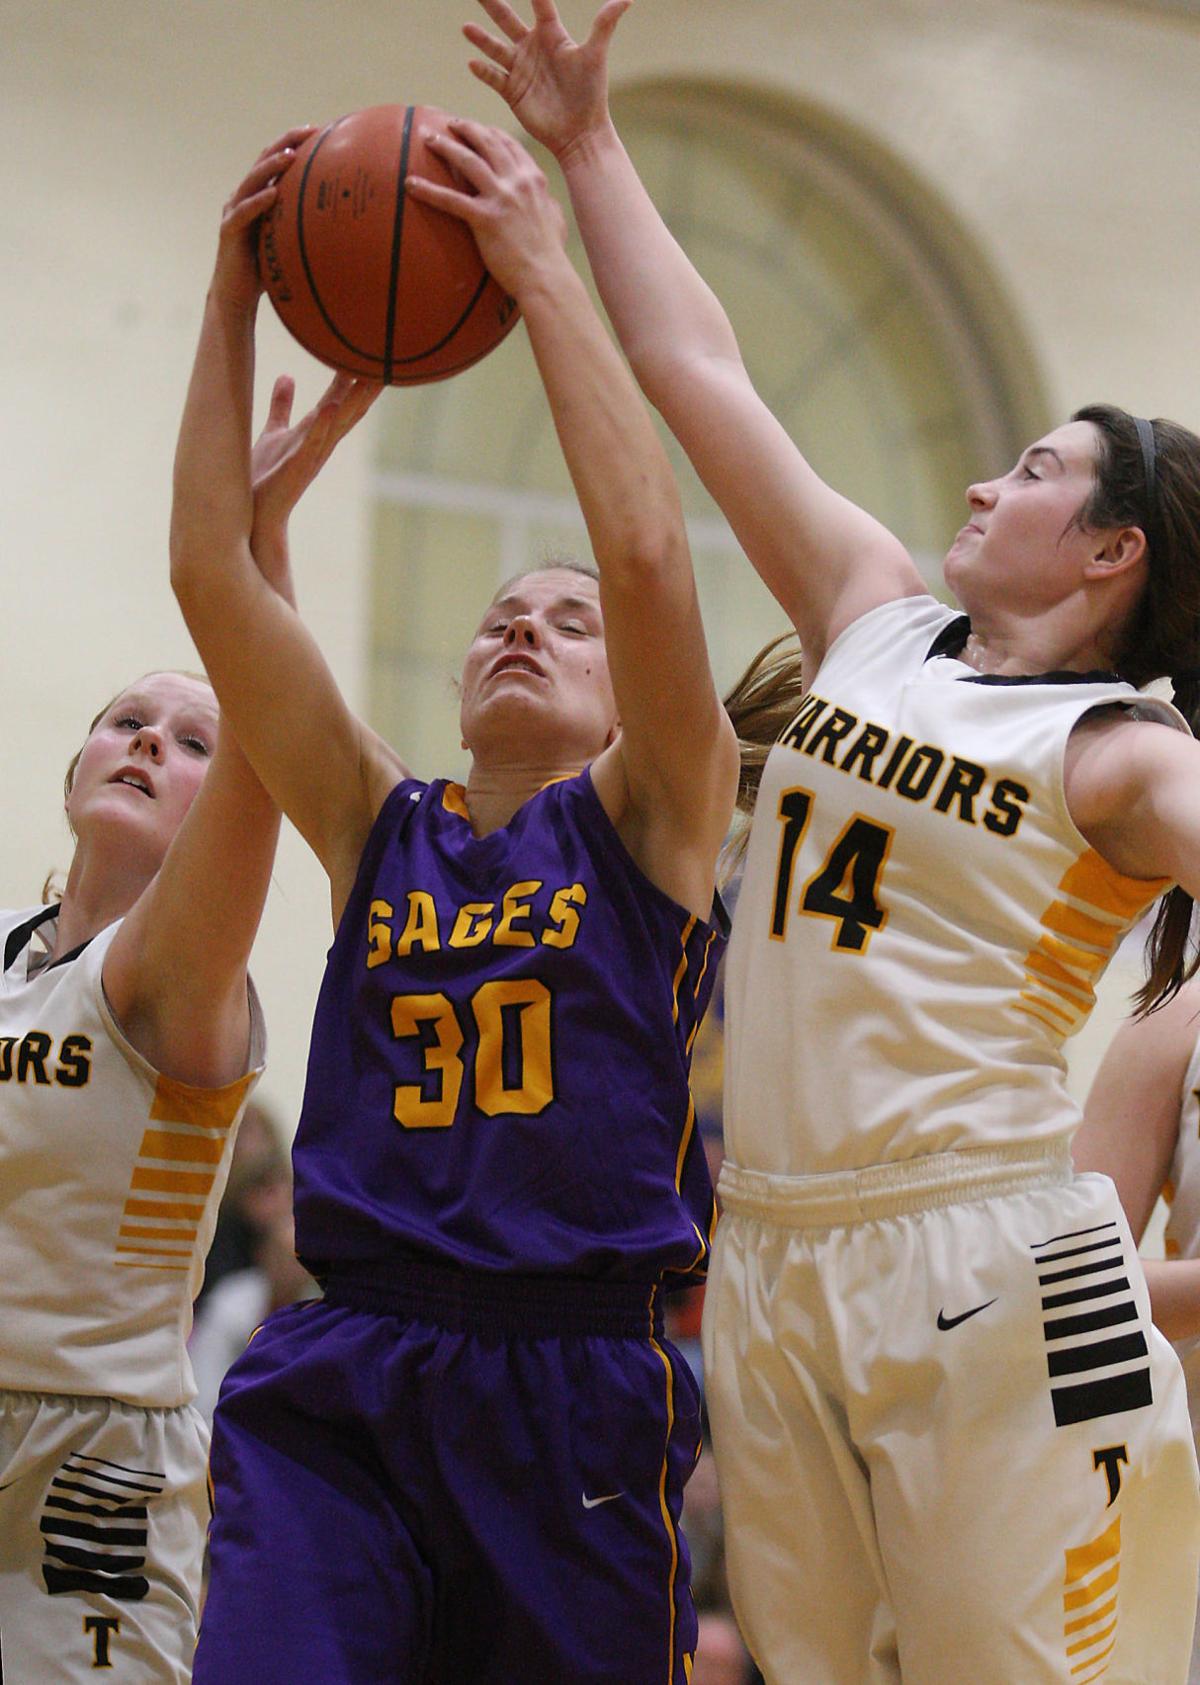 PHOTOS: Tuscola vs. Monticello at the Sages Holiday Hoopla Girls